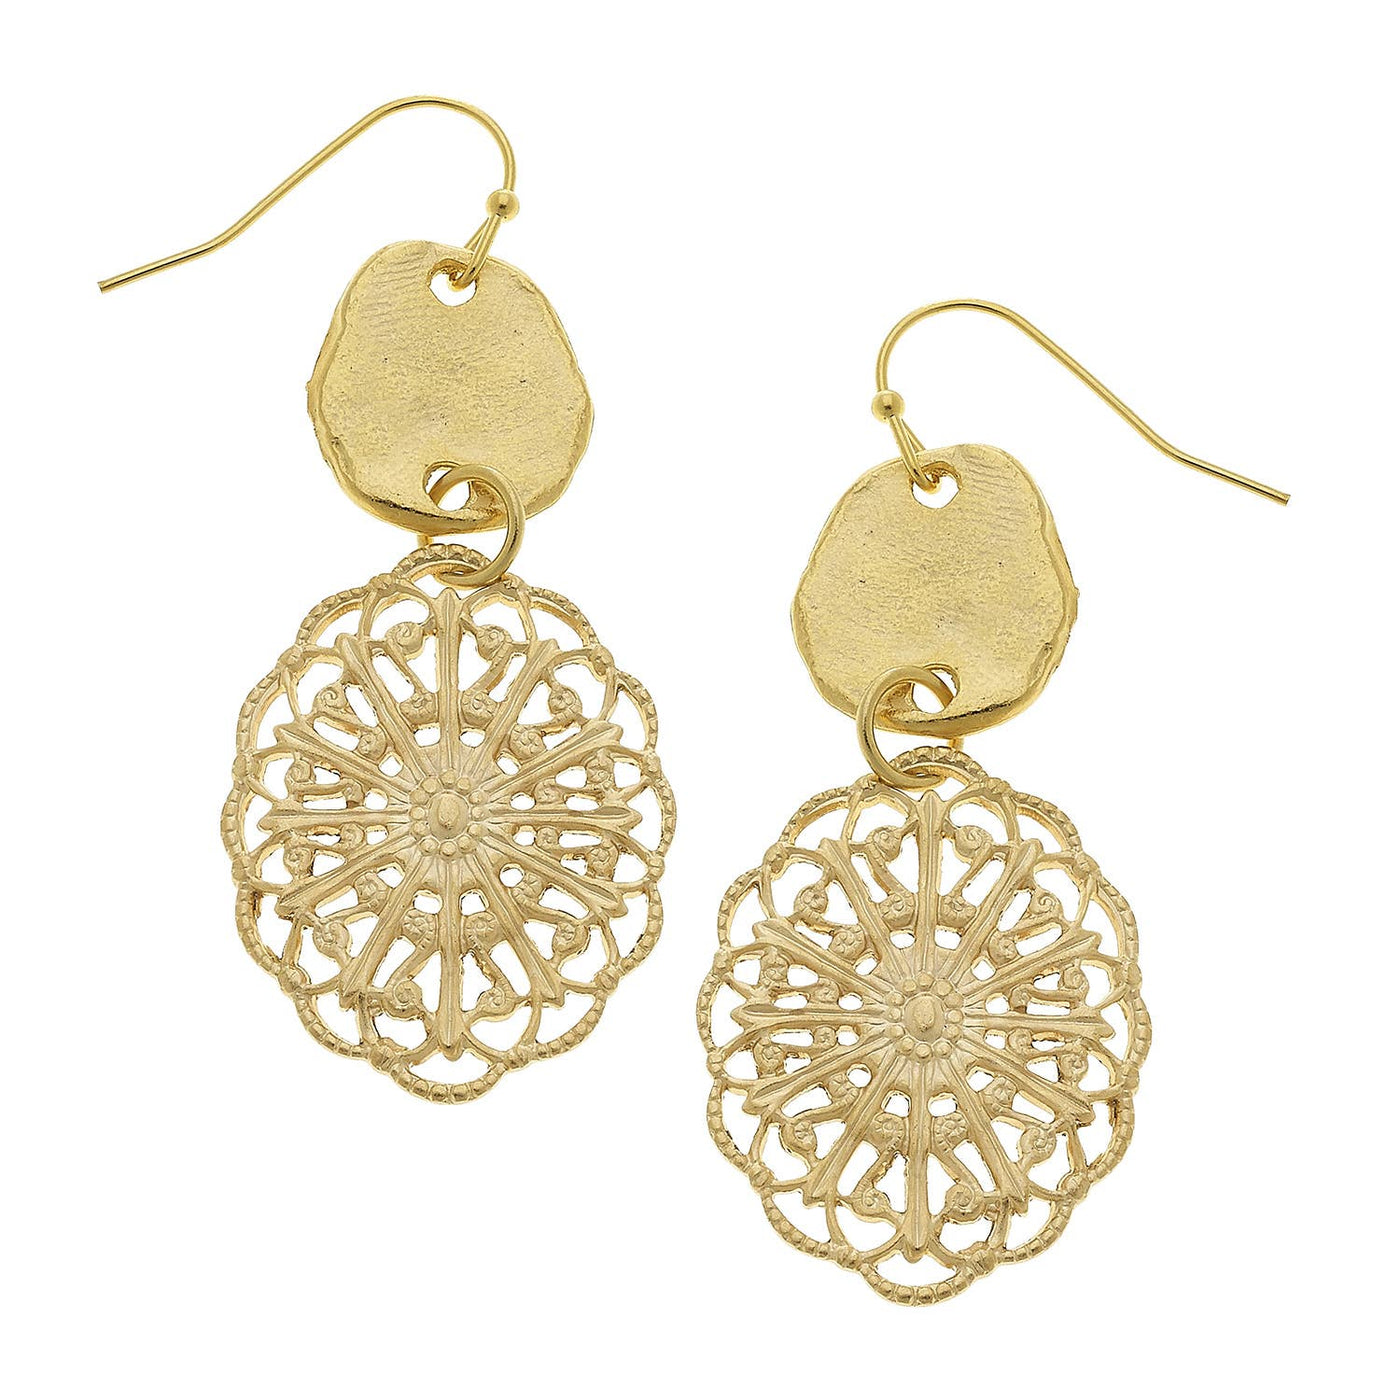 Gold and Filigree Earrings